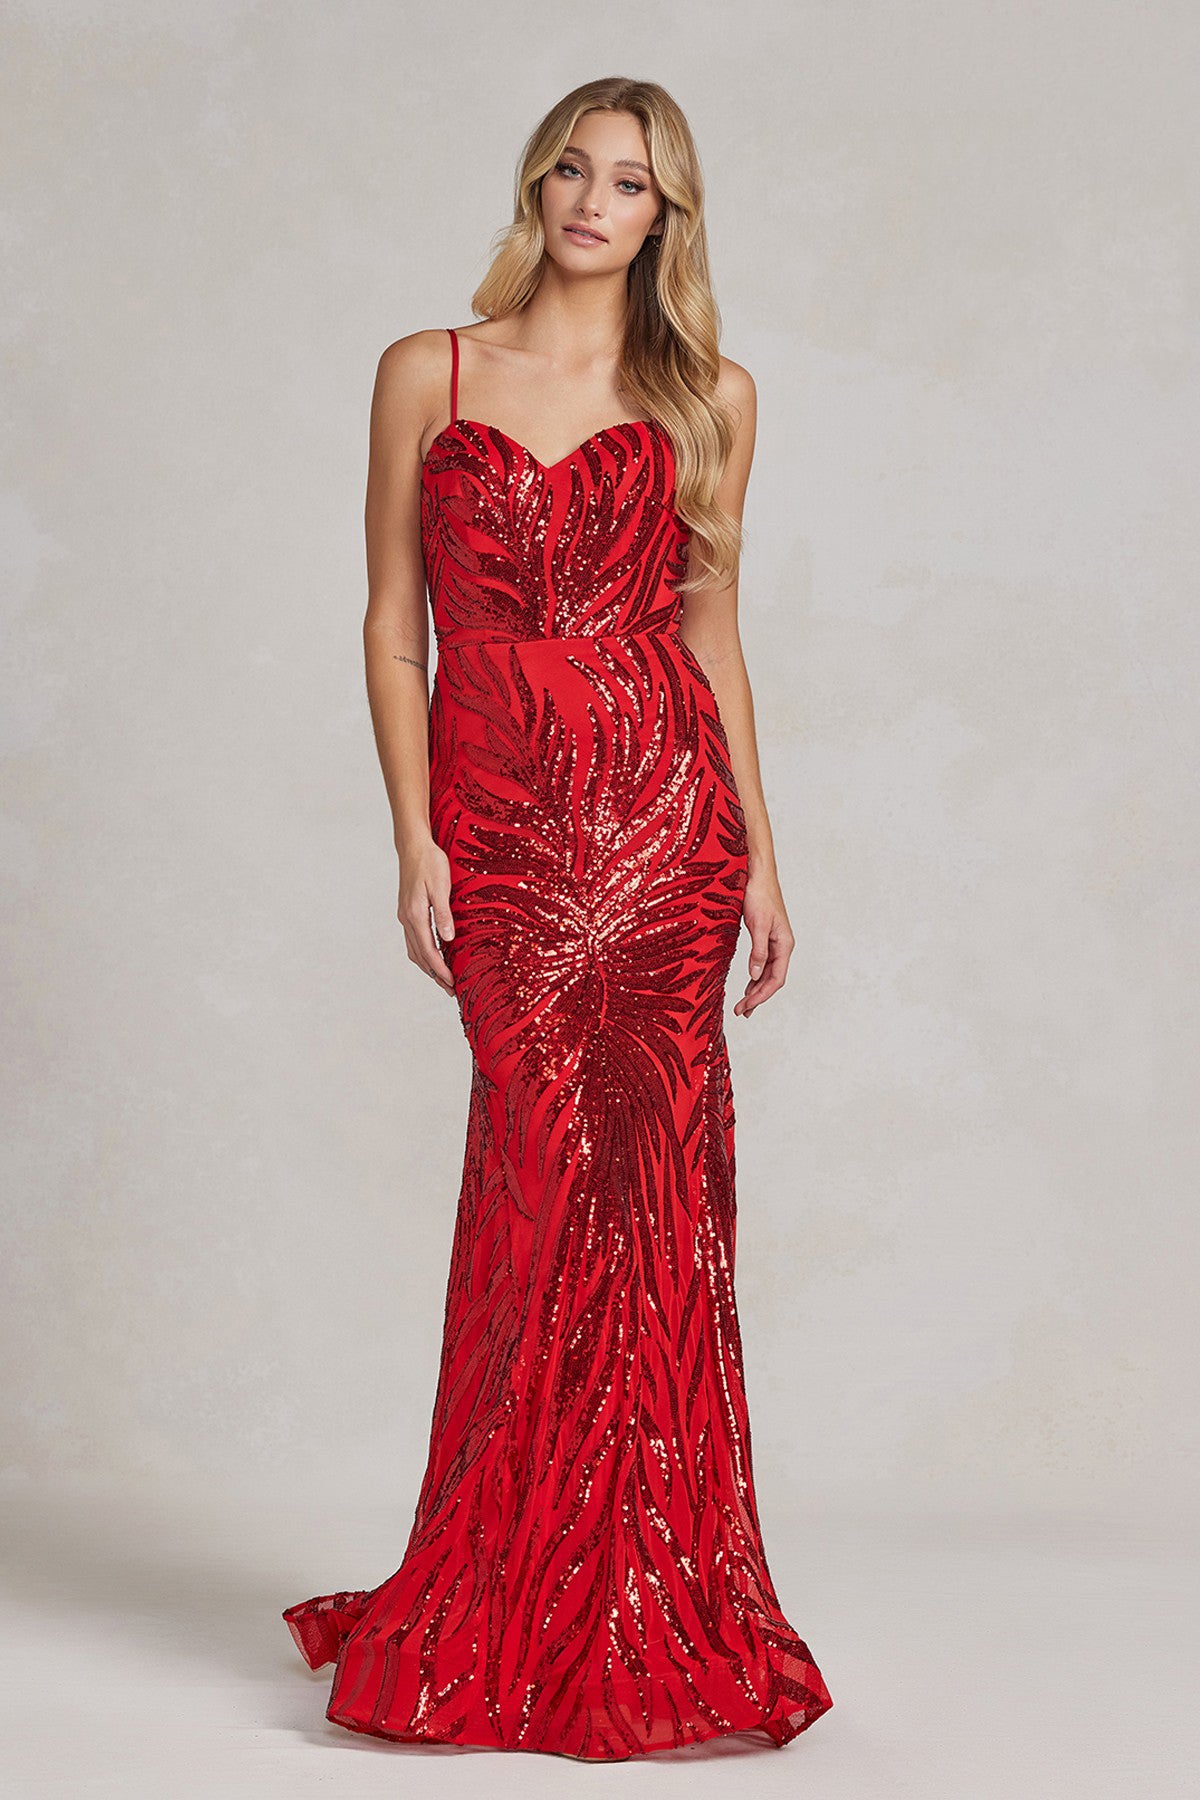 Red Carpet Gown - LAXR1072